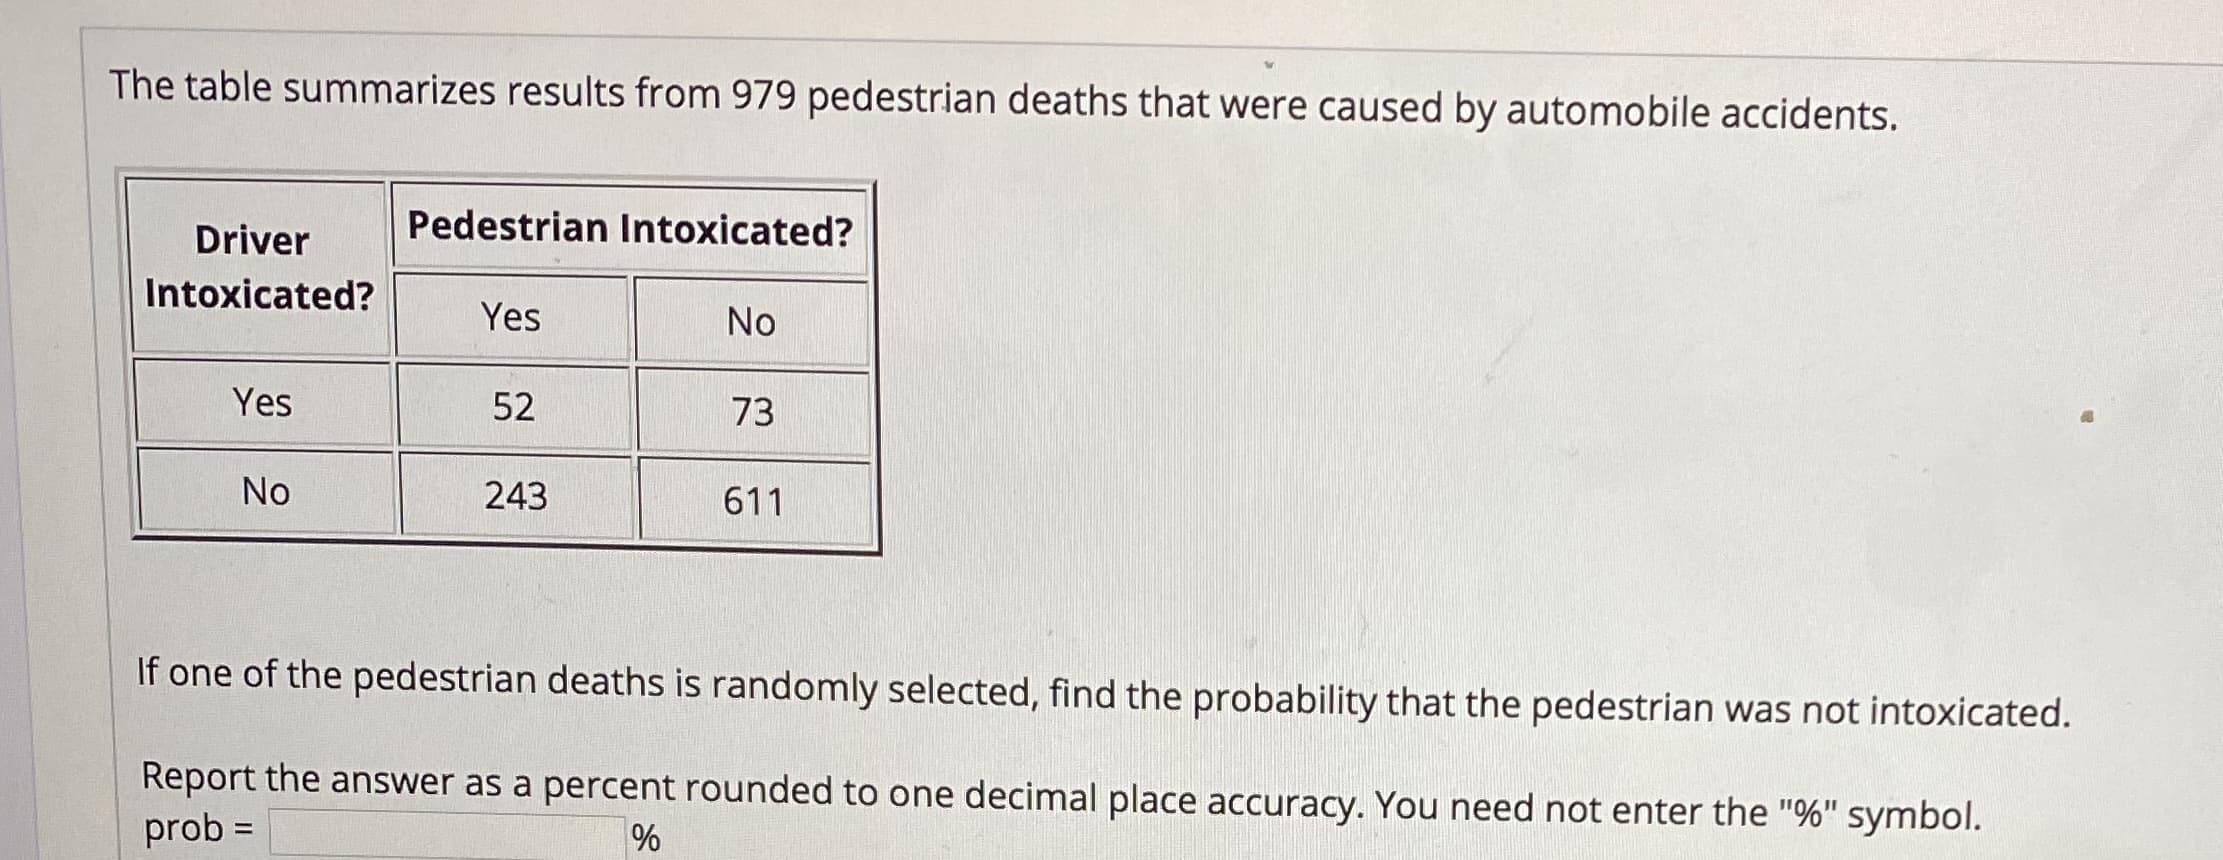 The table summarizes results from 979 pedestrian deaths that were caused by automobile accidents.
Driver
Pedestrian Intoxicated?
Intoxicated?
Yes
No
Yes
52
73
No
243
611
If one of the pedestrian deaths is randomly selected, find the probability that the pedestrian was not intoxicated.
Report the answer as a percent rounded to one decimal place accuracy. You need not enter the "%" symbol.
prob =
